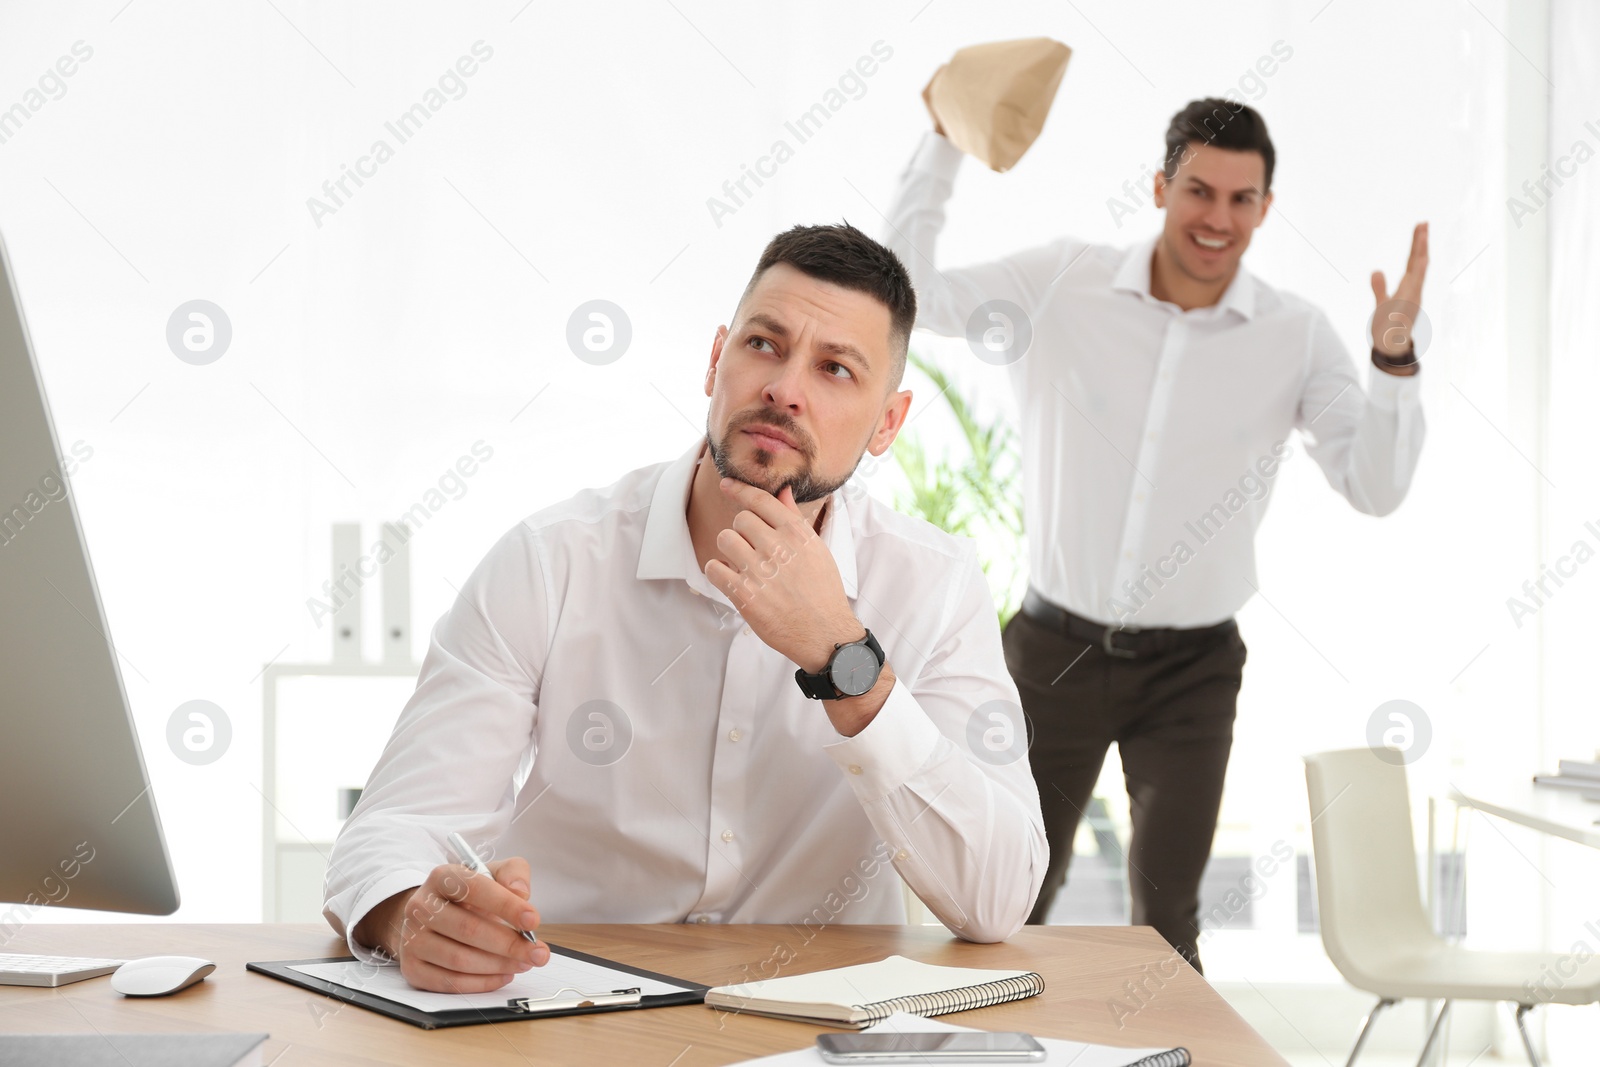 Photo of Man popping paper bag behind his colleague in office. April fool's day